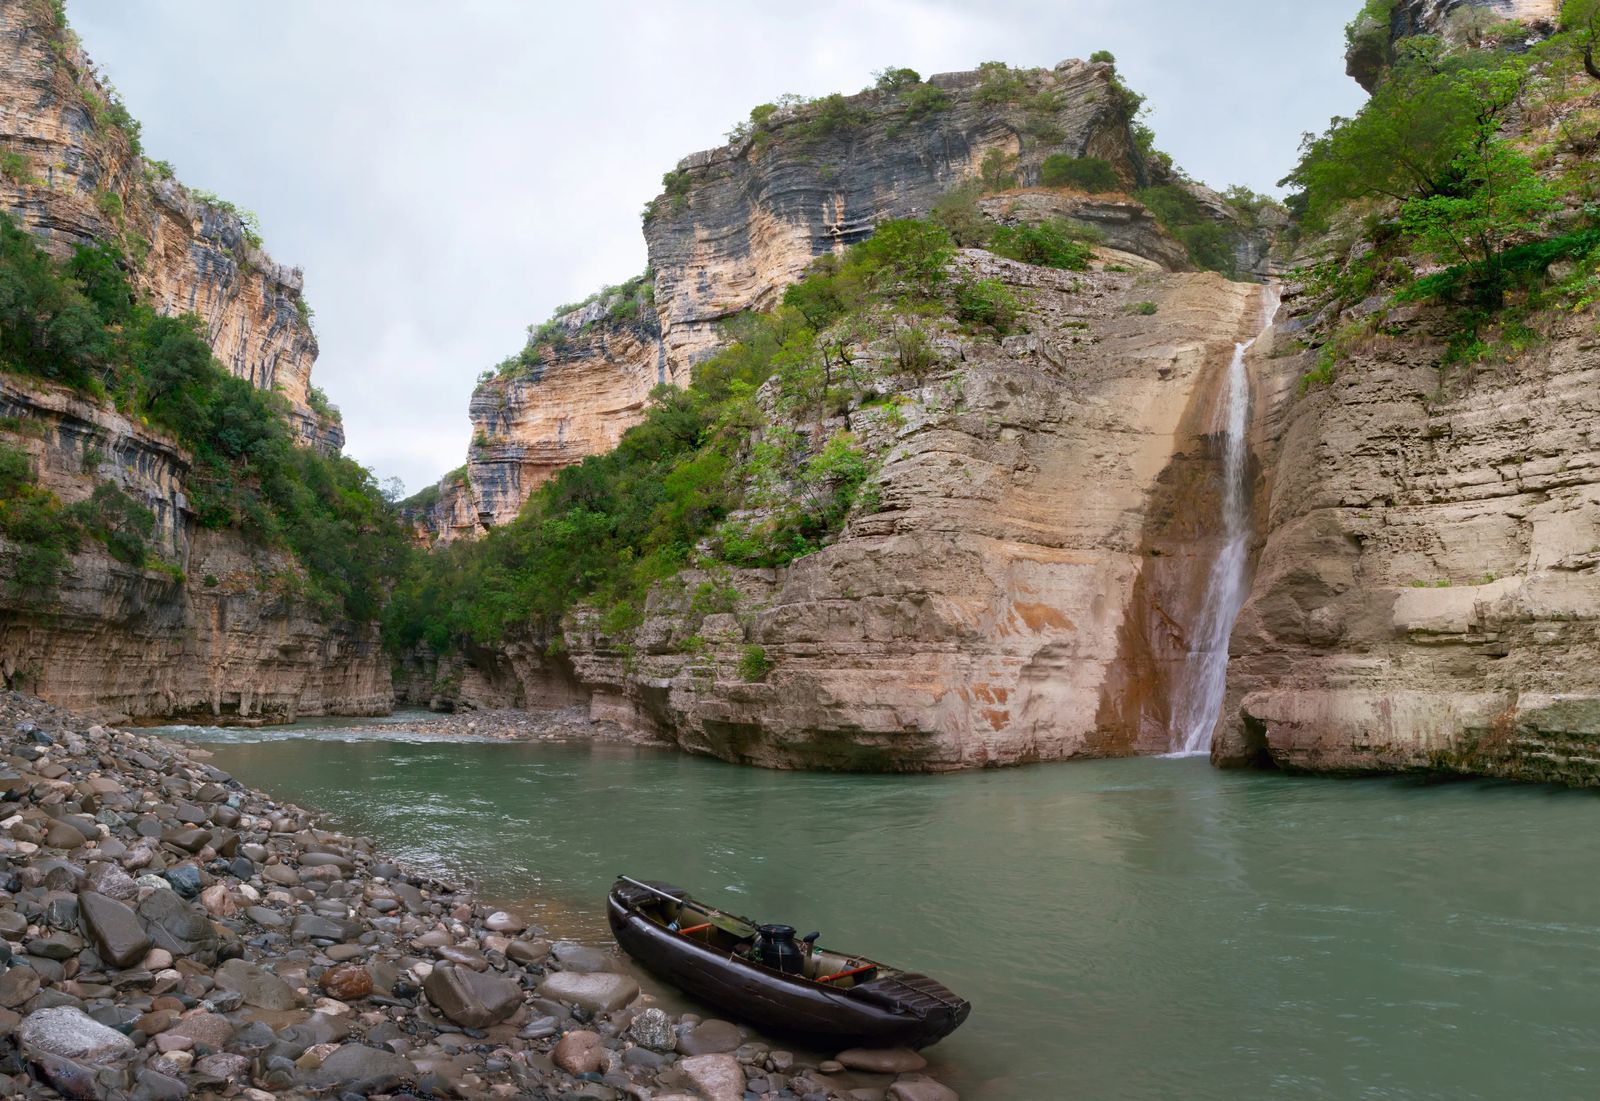 Osum Canyon - Things to see in berat Albania in one day